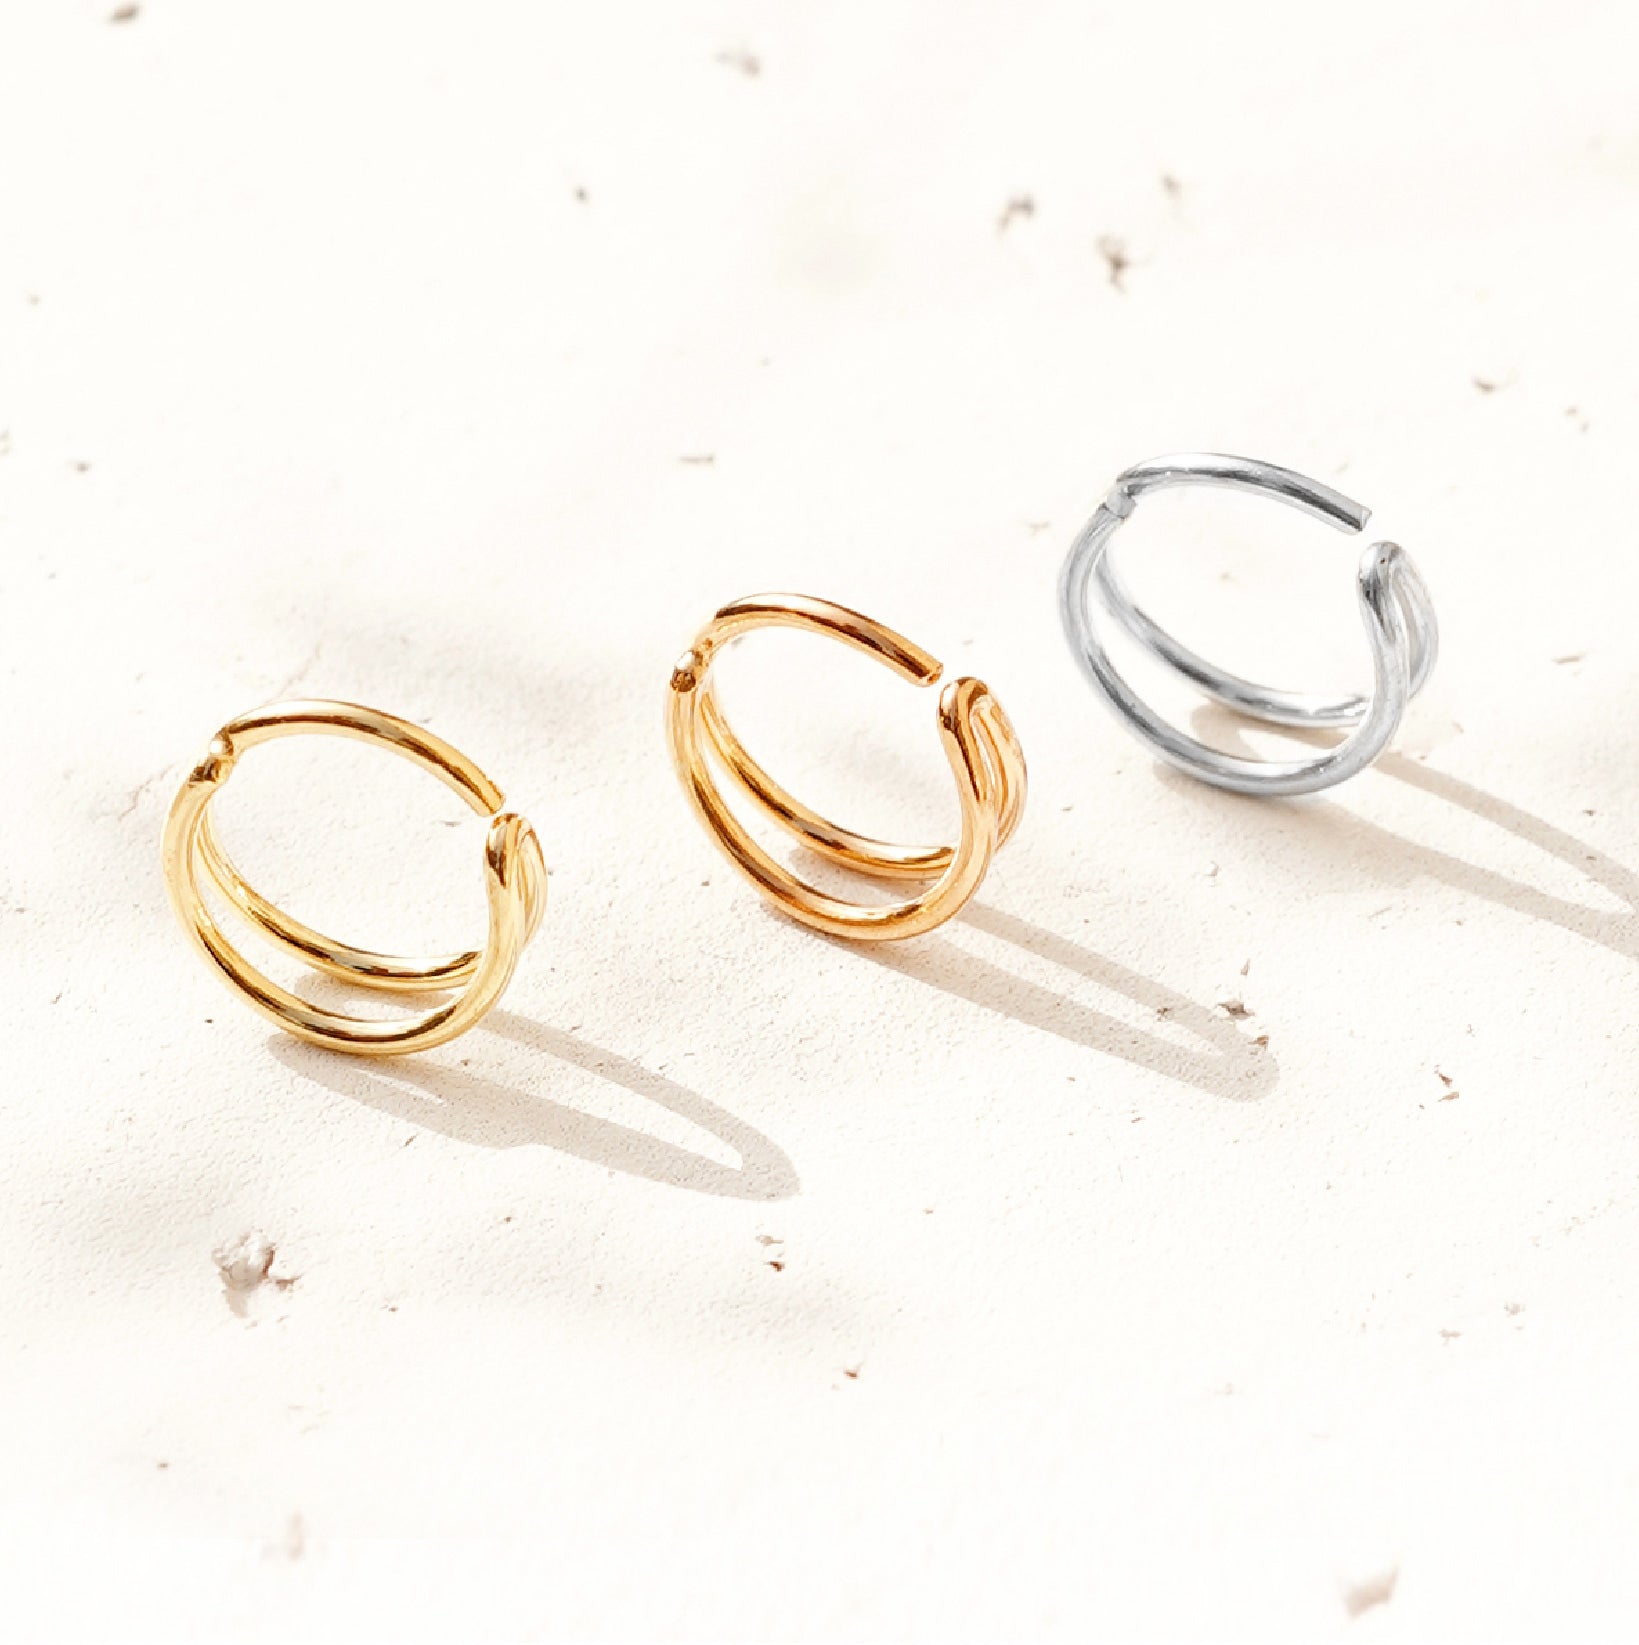 Maria Double Nose Ring Hoop, Gold Nose Ring - TinyBox Jewelry